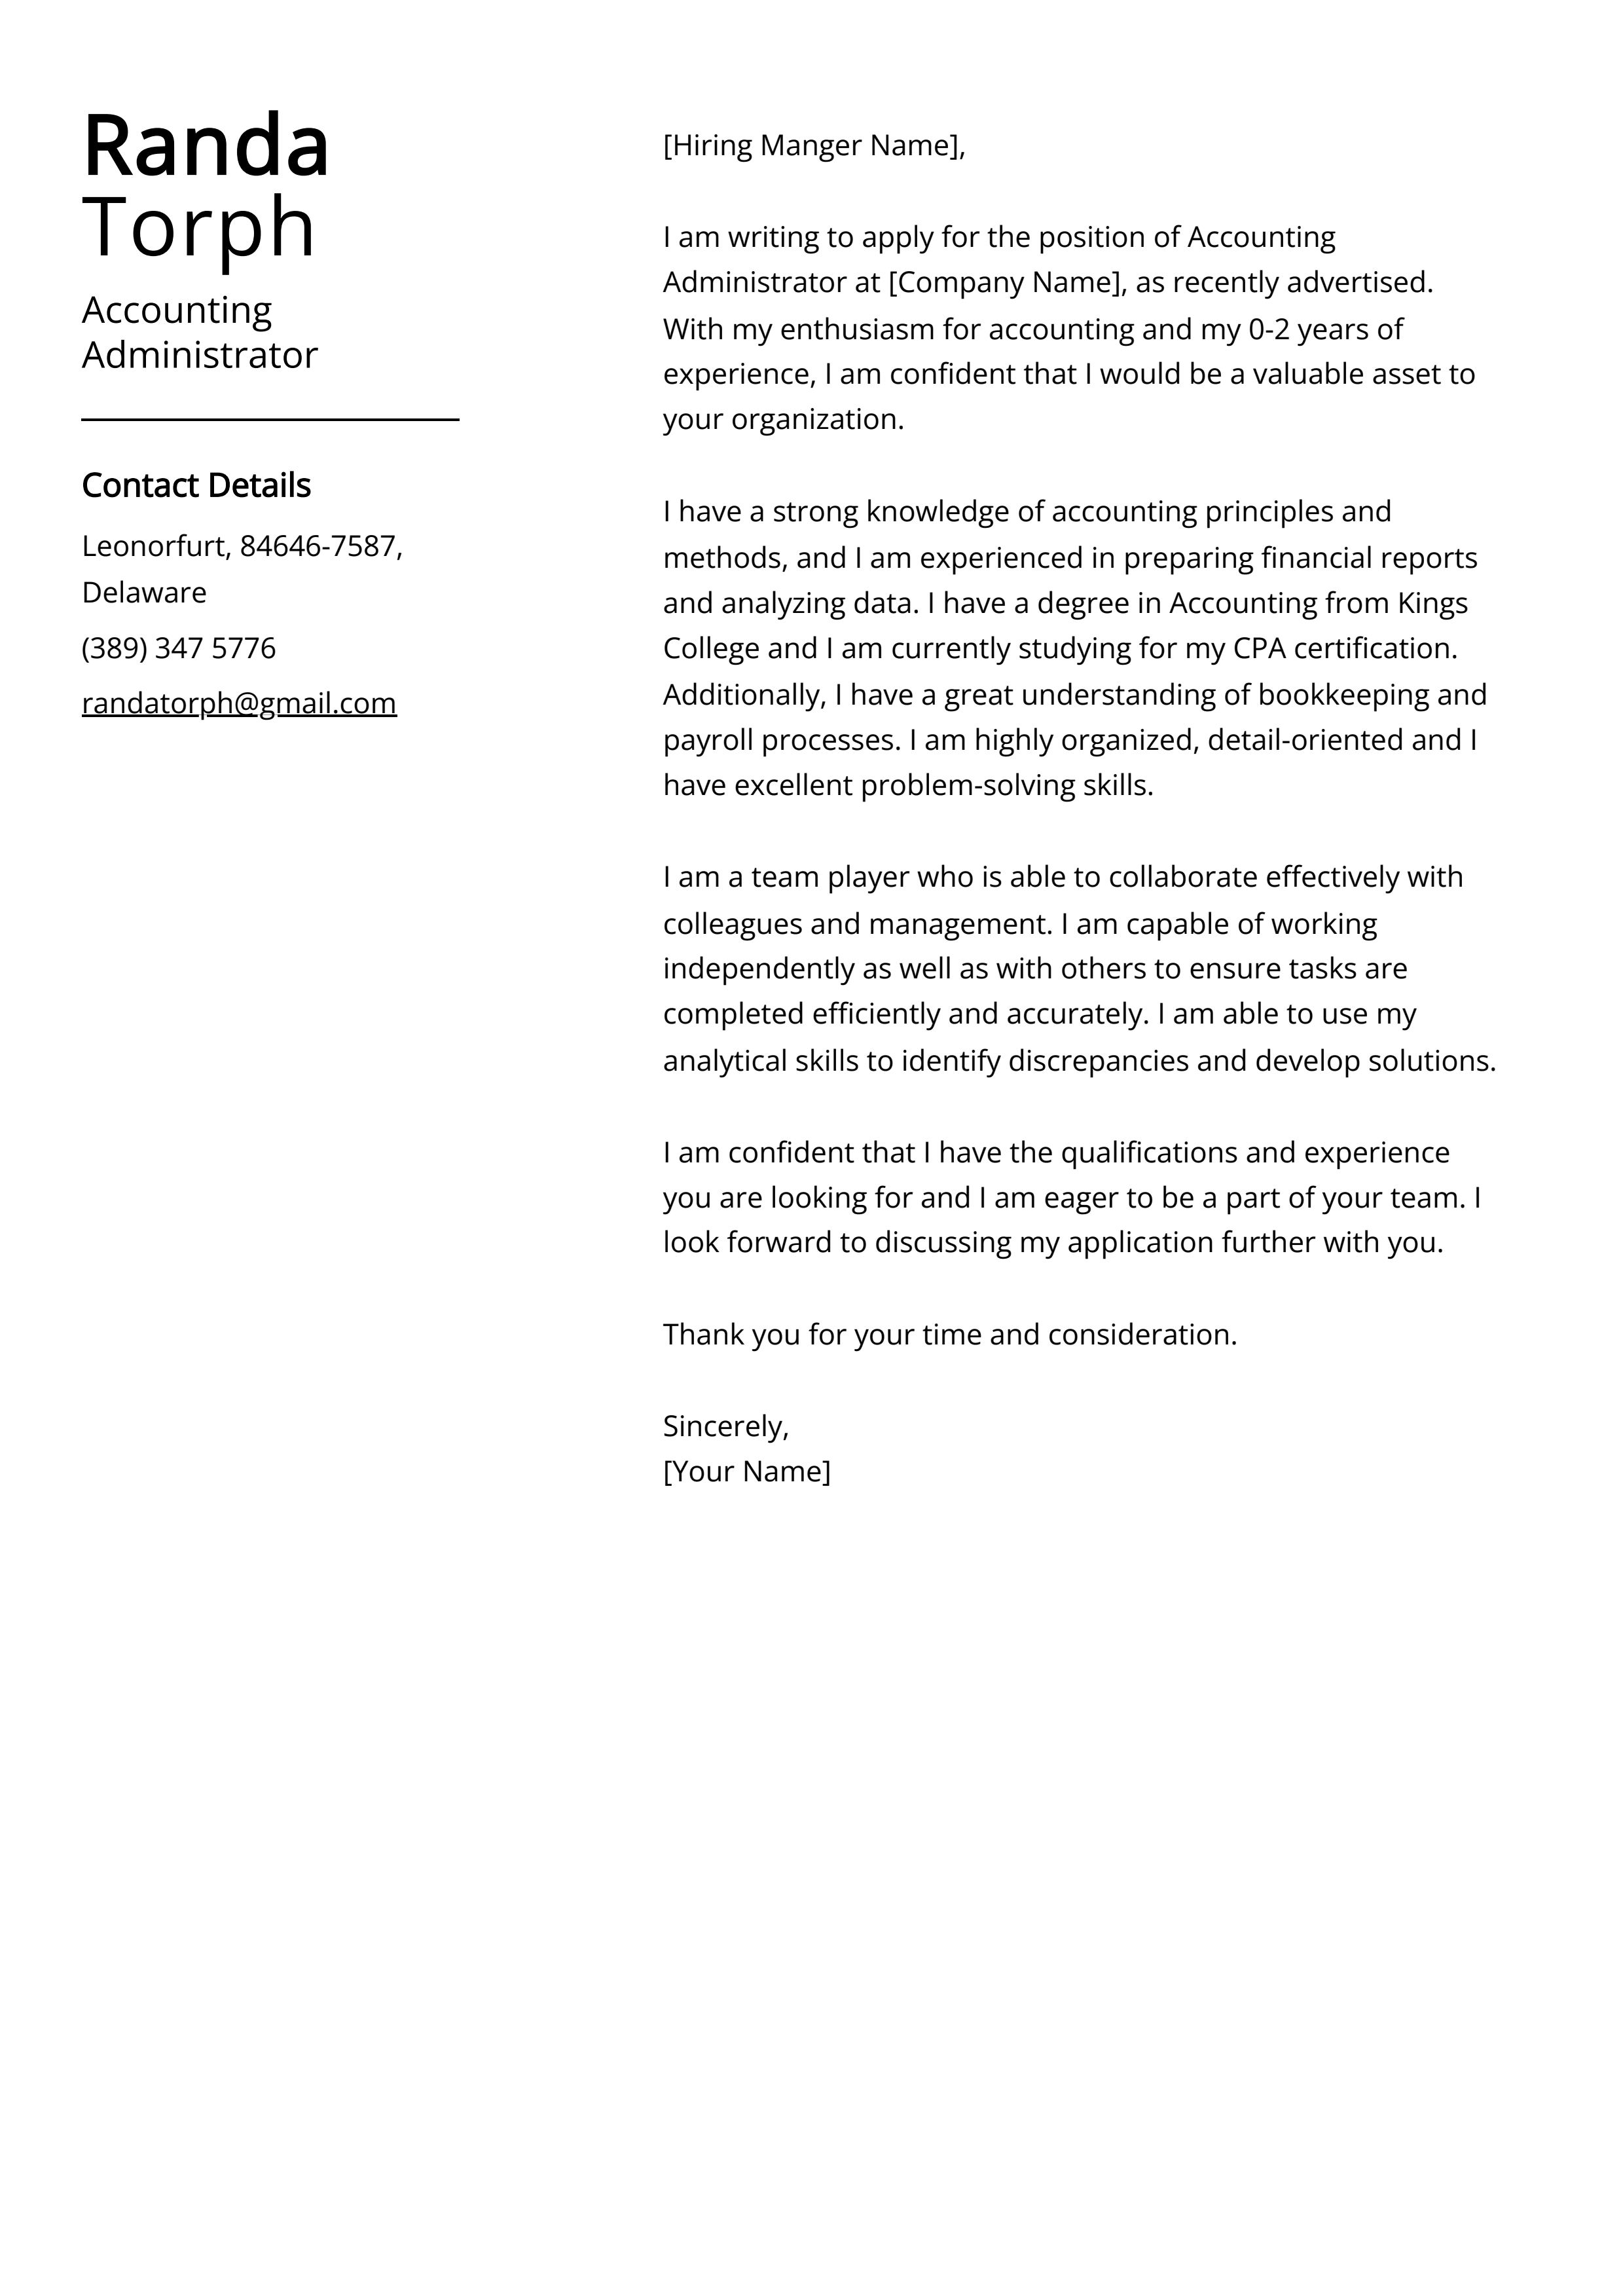 Accounting Administrator Cover Letter Example